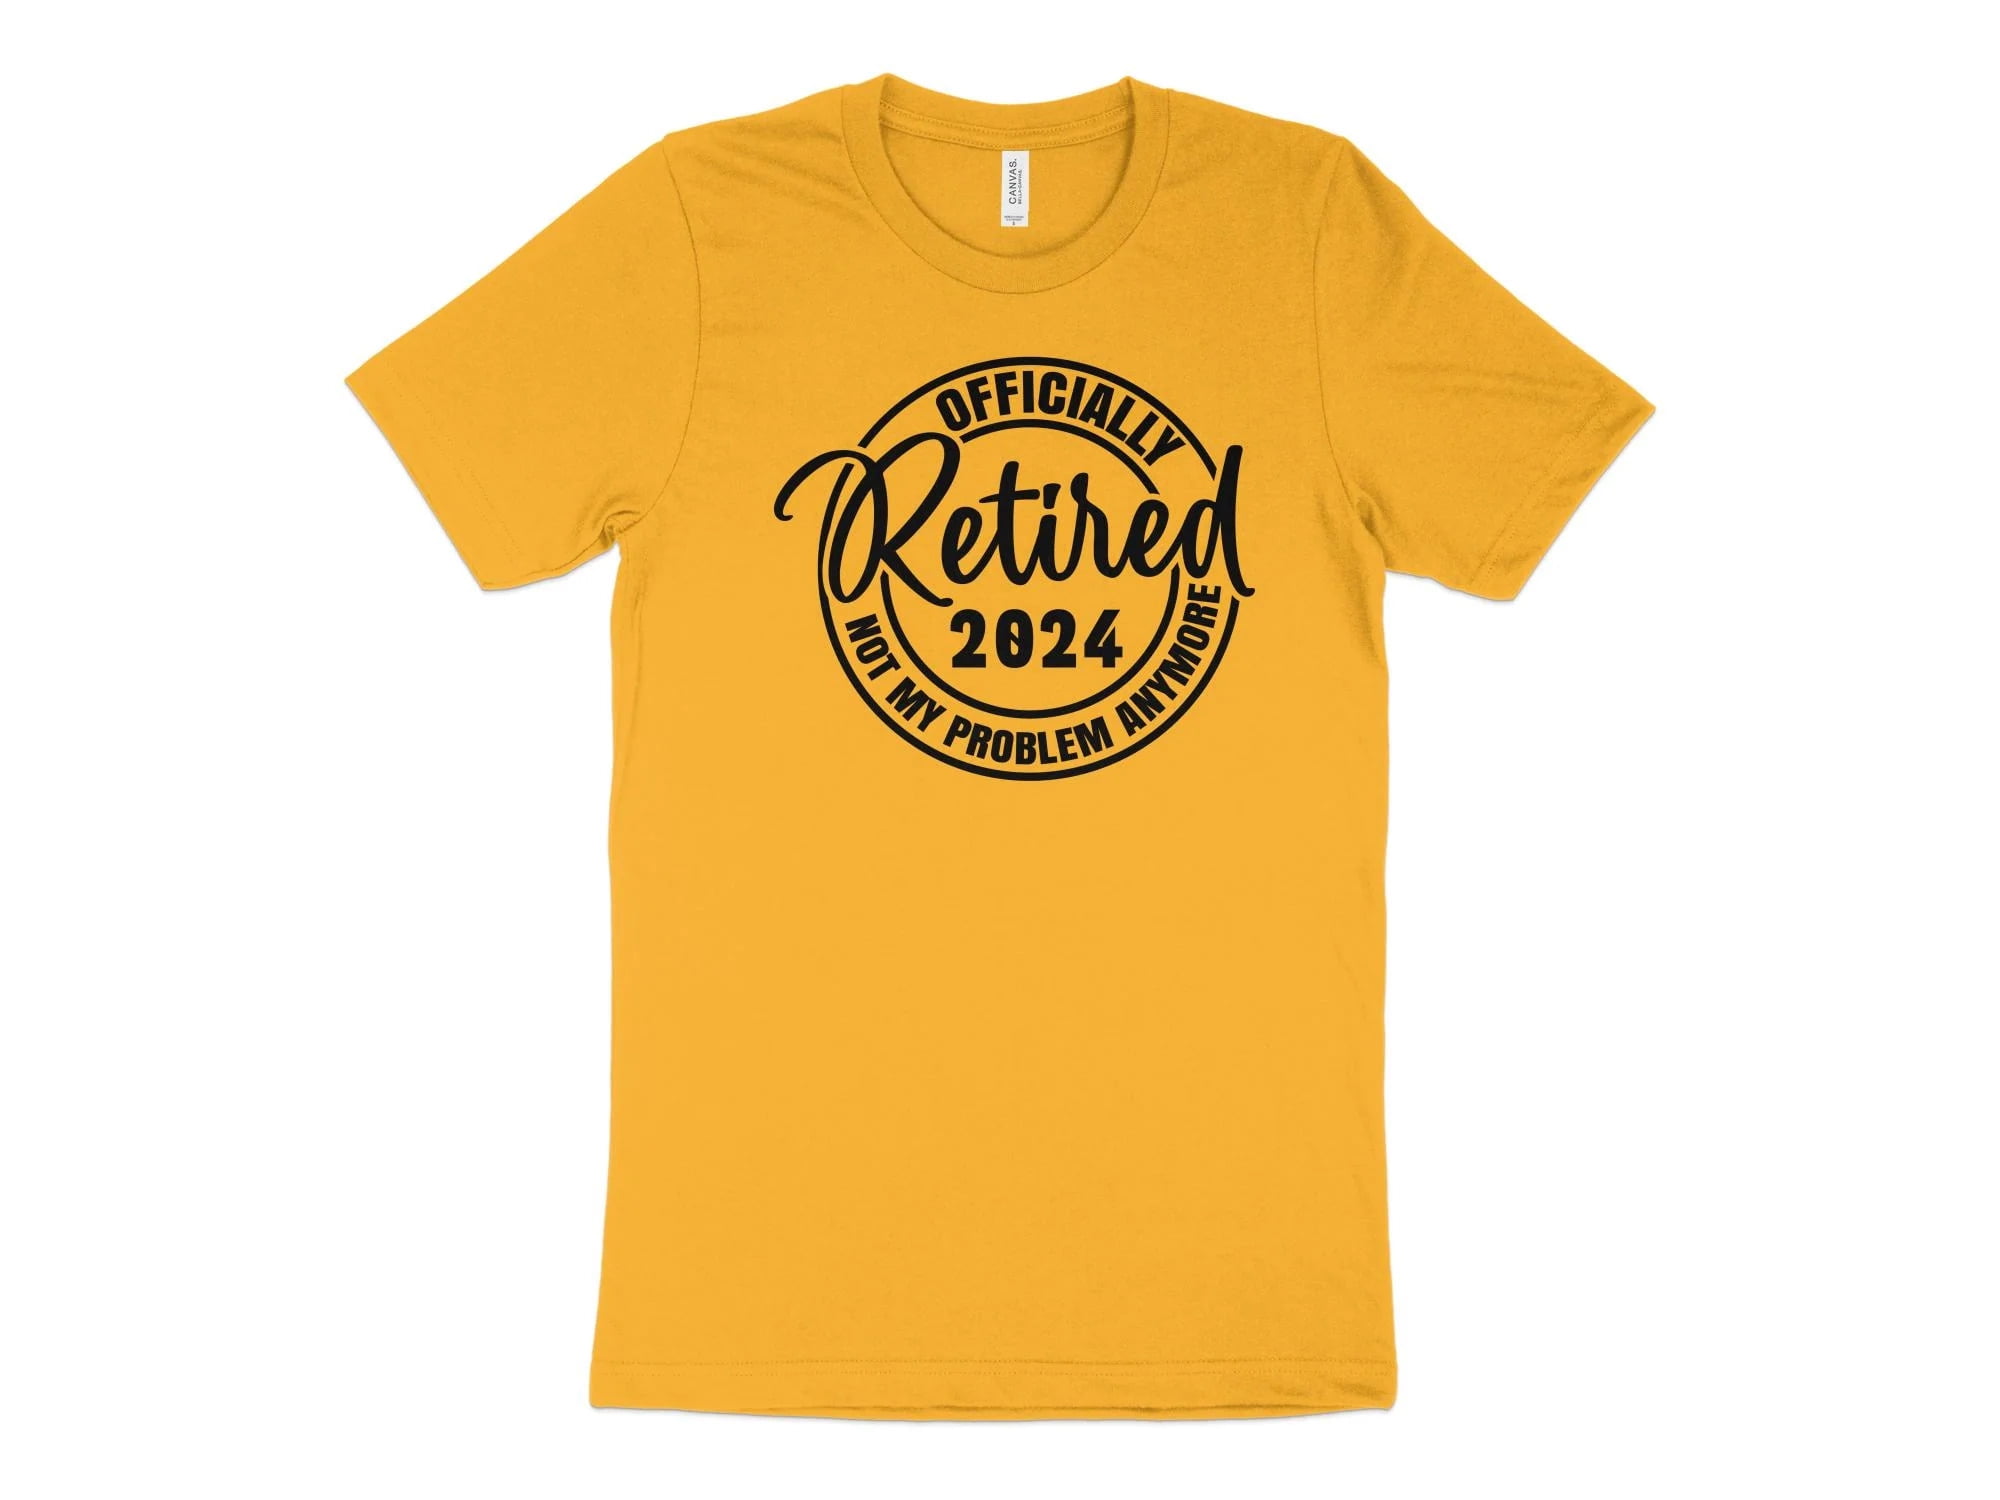 Officially Retired 2024 T-Shirt, Retirement Gifts For Him, Retirement